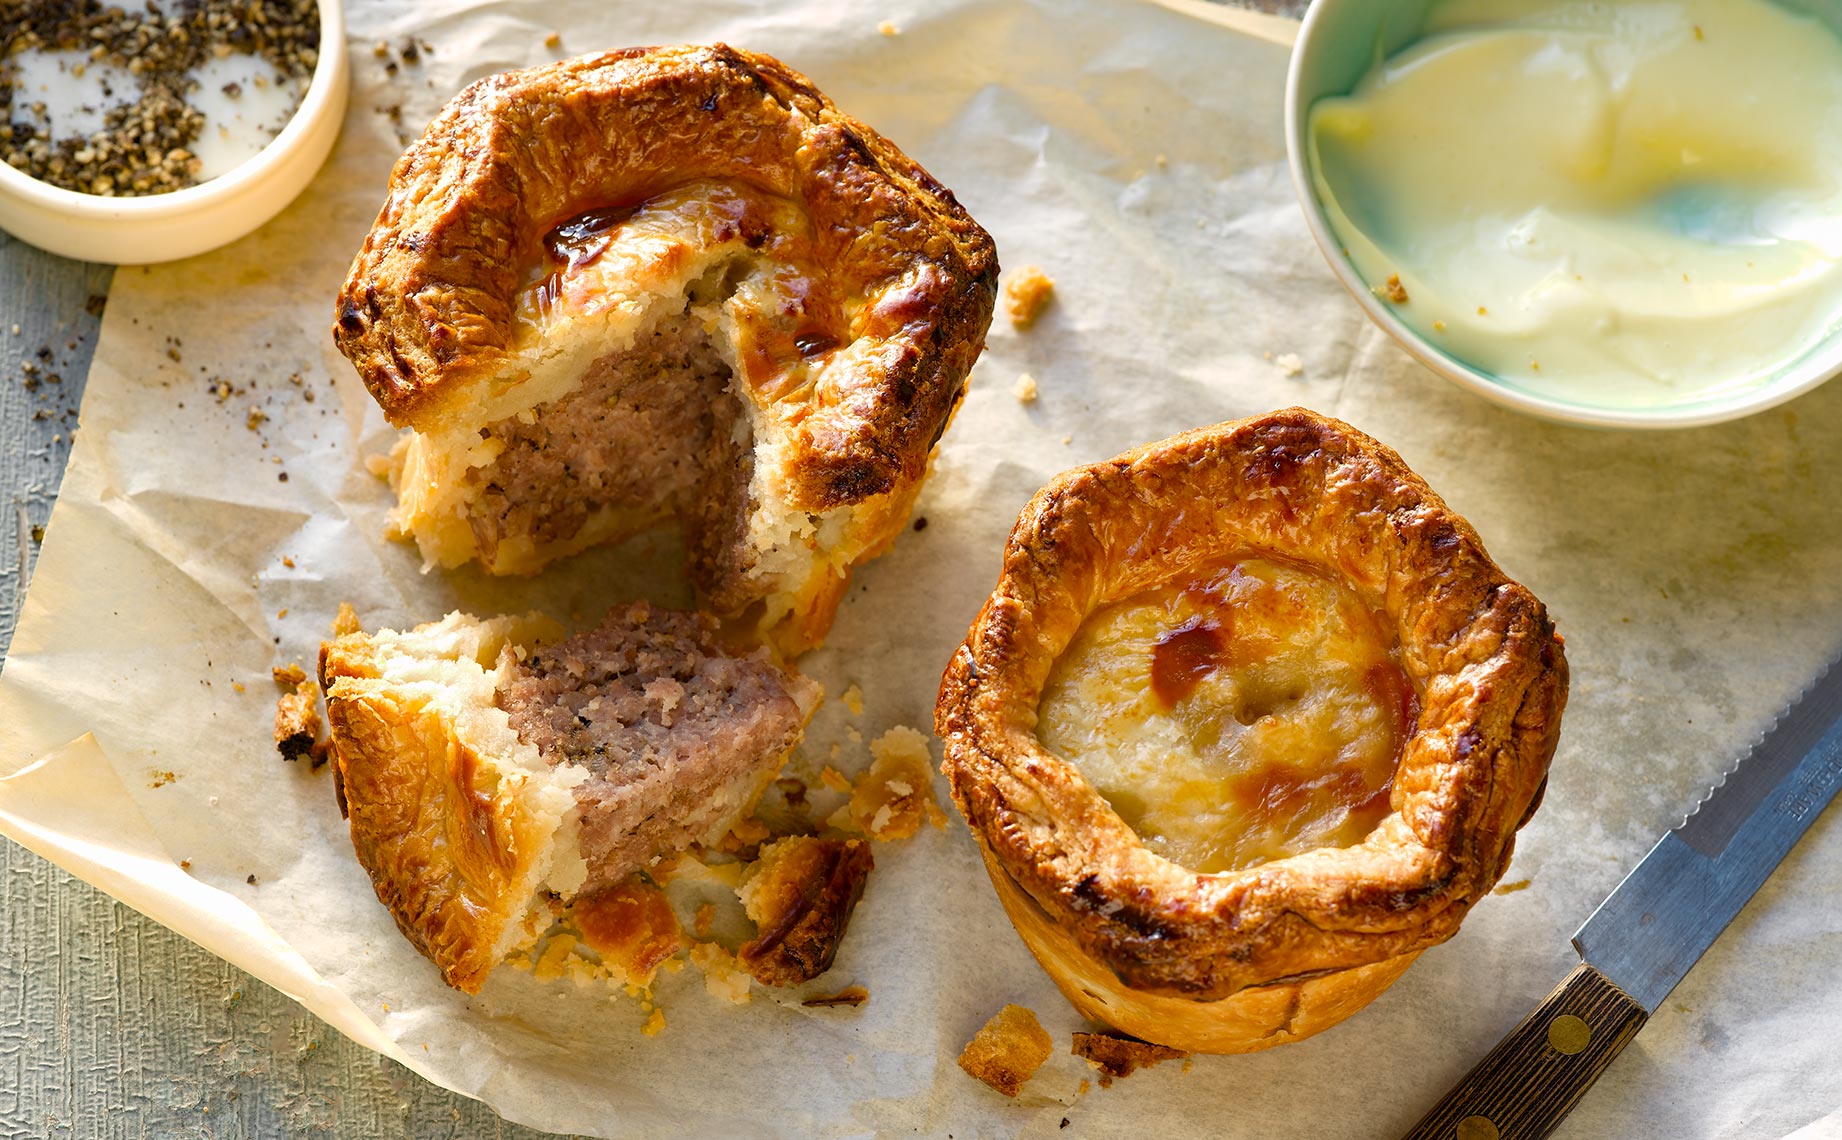 Home made Pork pies | Colin Campbell - Food Photographer